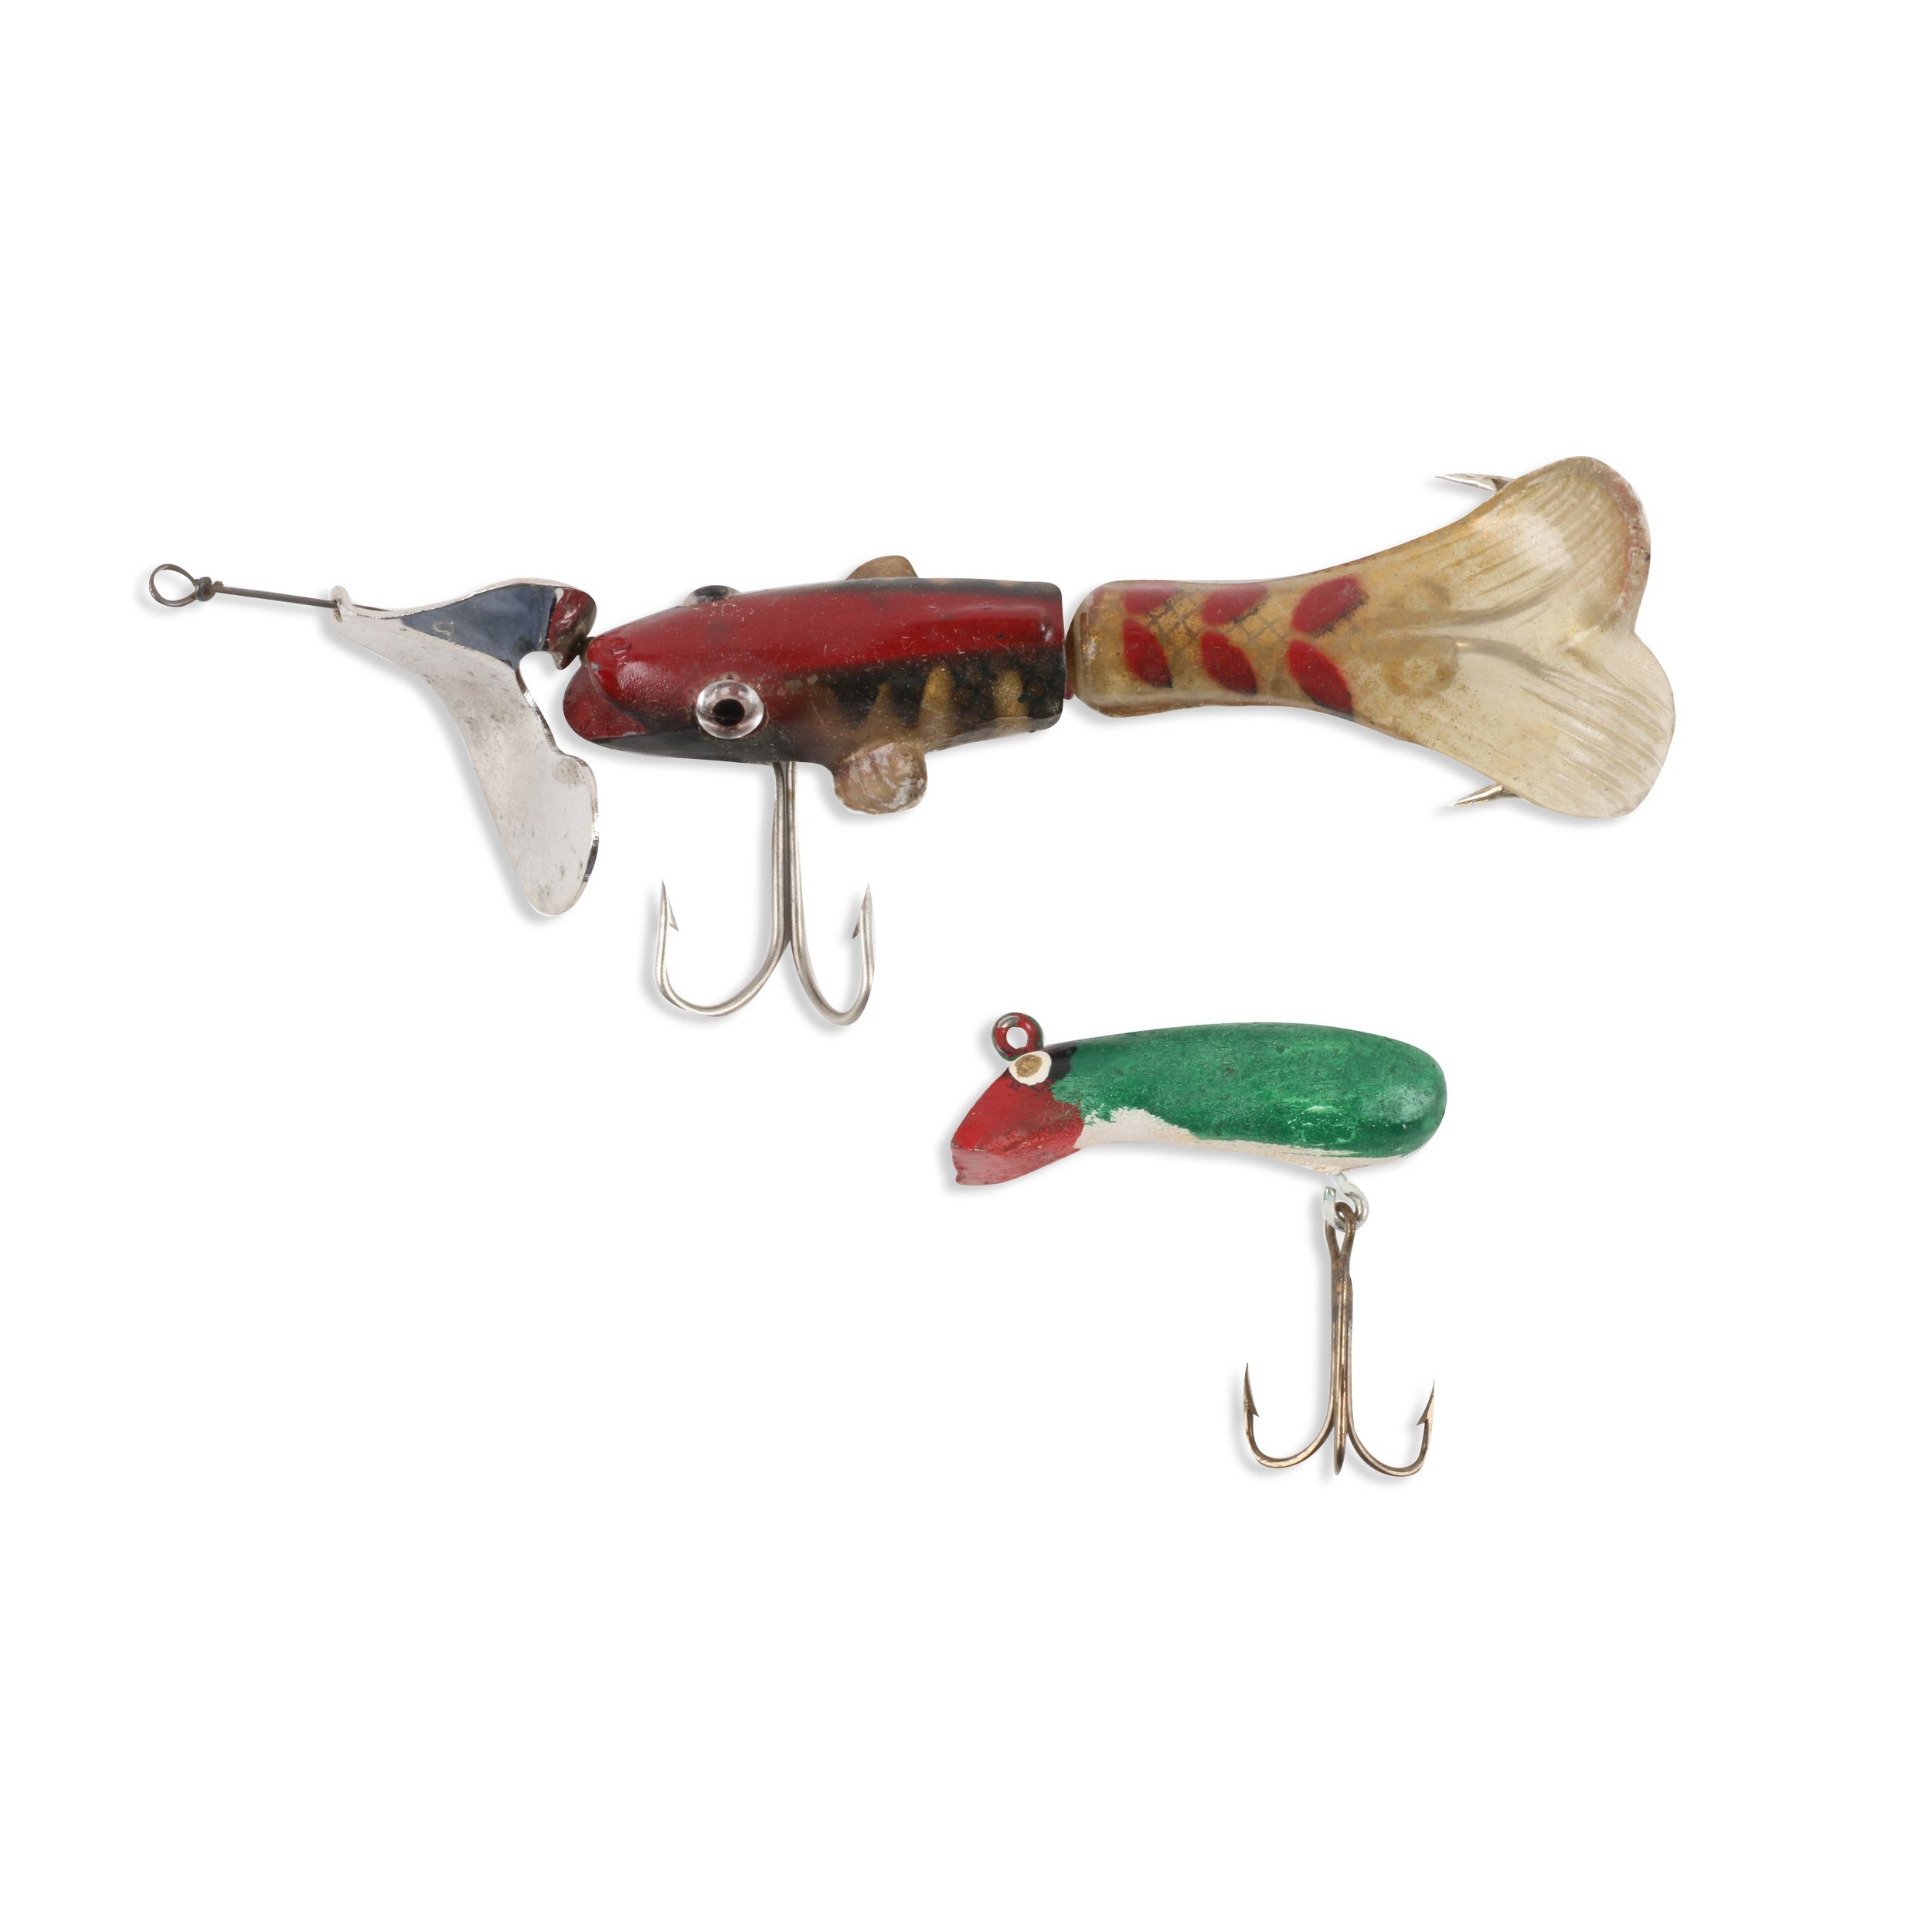 Fishing Lures for sale in Seattle, Washington